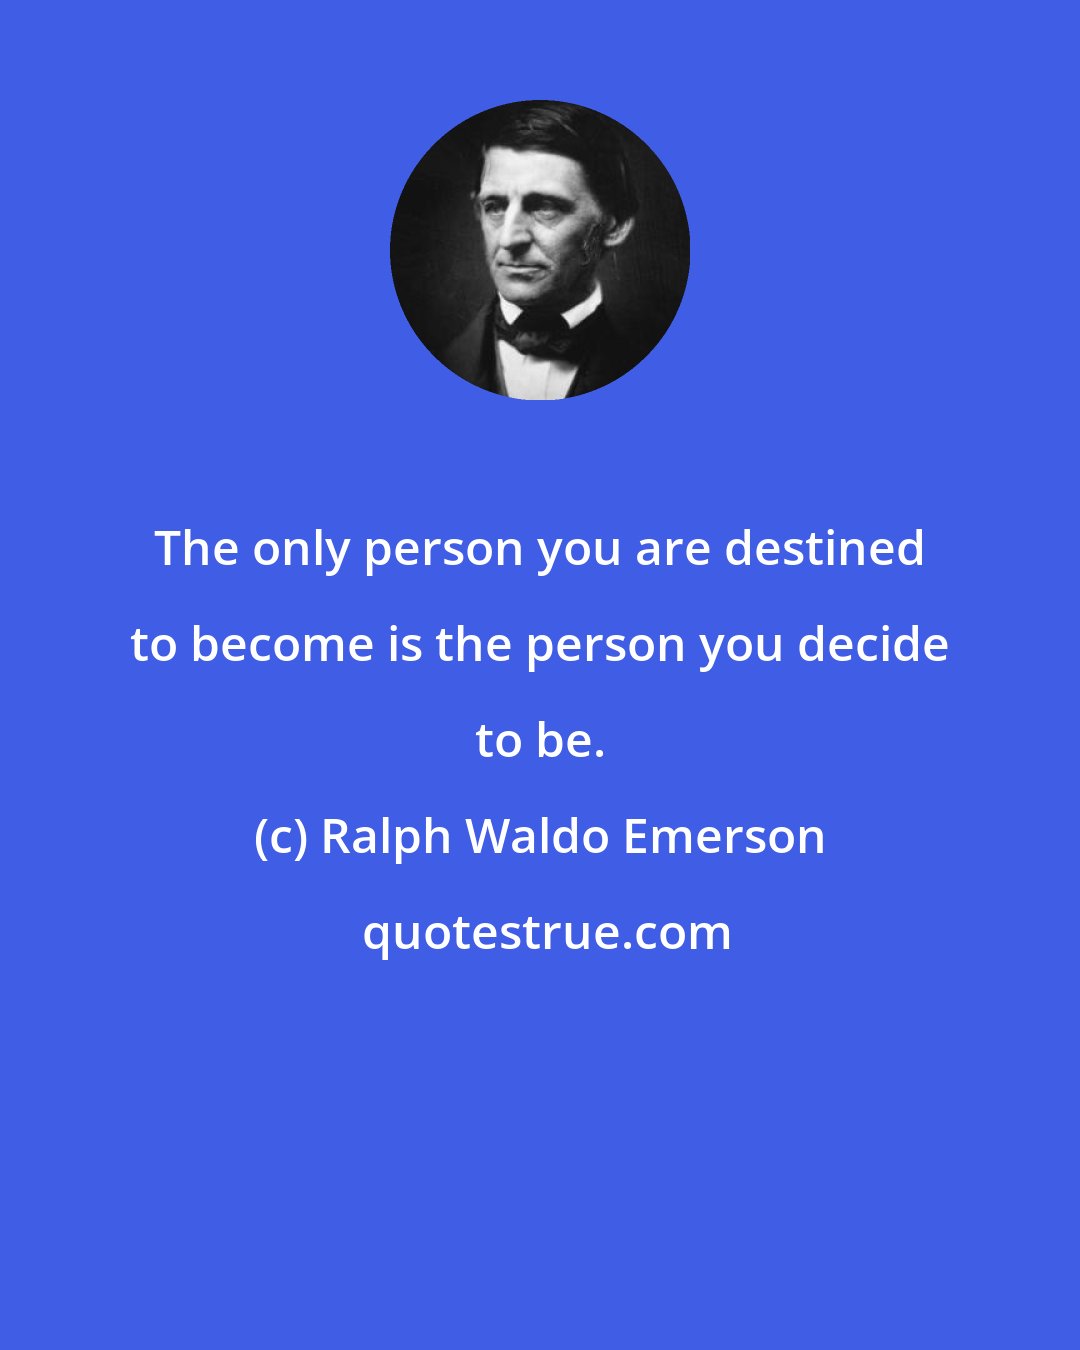 Ralph Waldo Emerson: The only person you are destined to become is the person you decide to be.